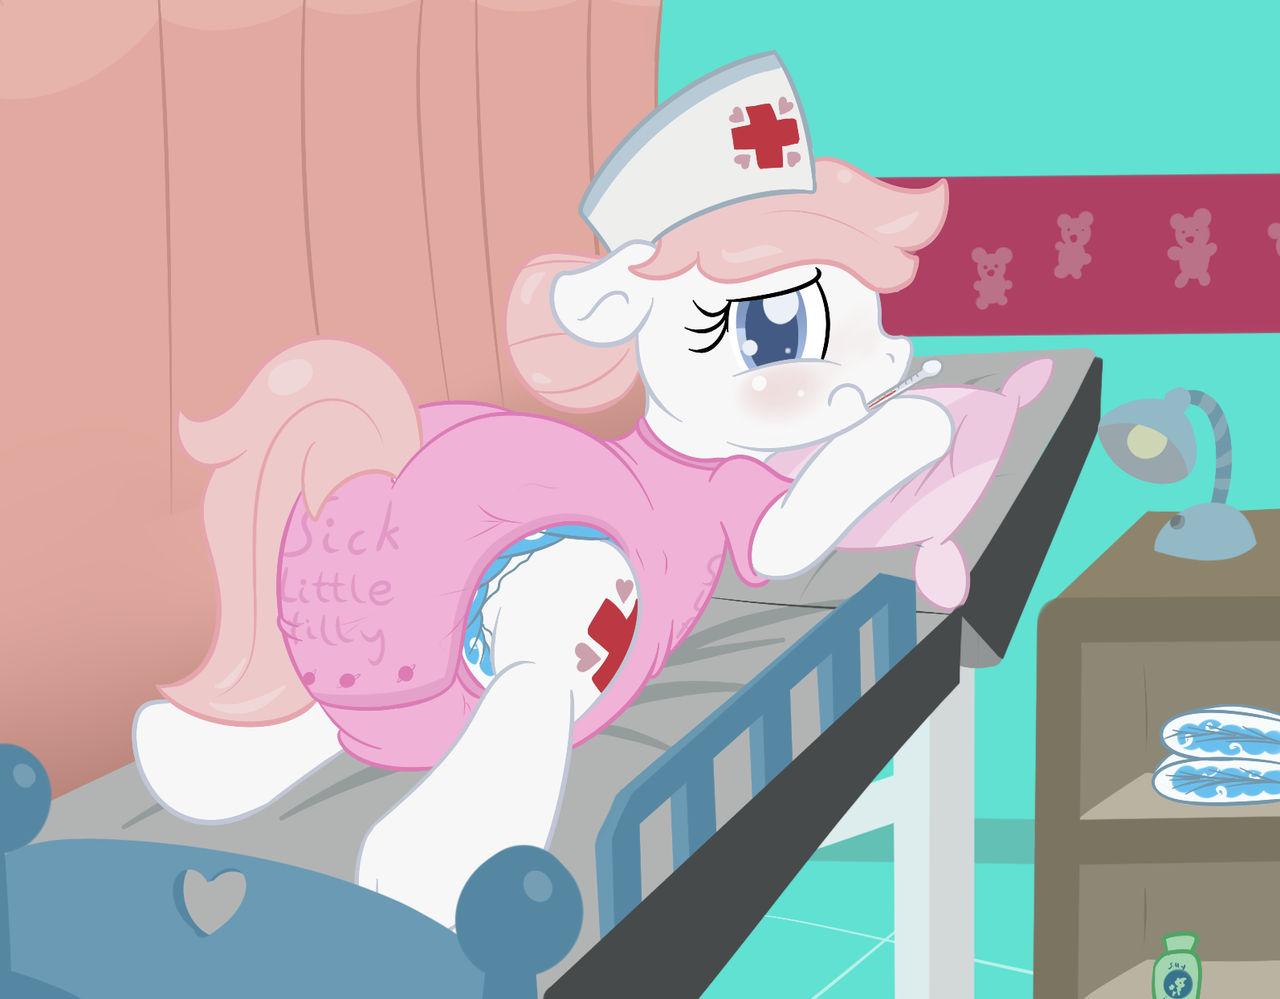 Sick Little Filly by Microippon on DeviantArt